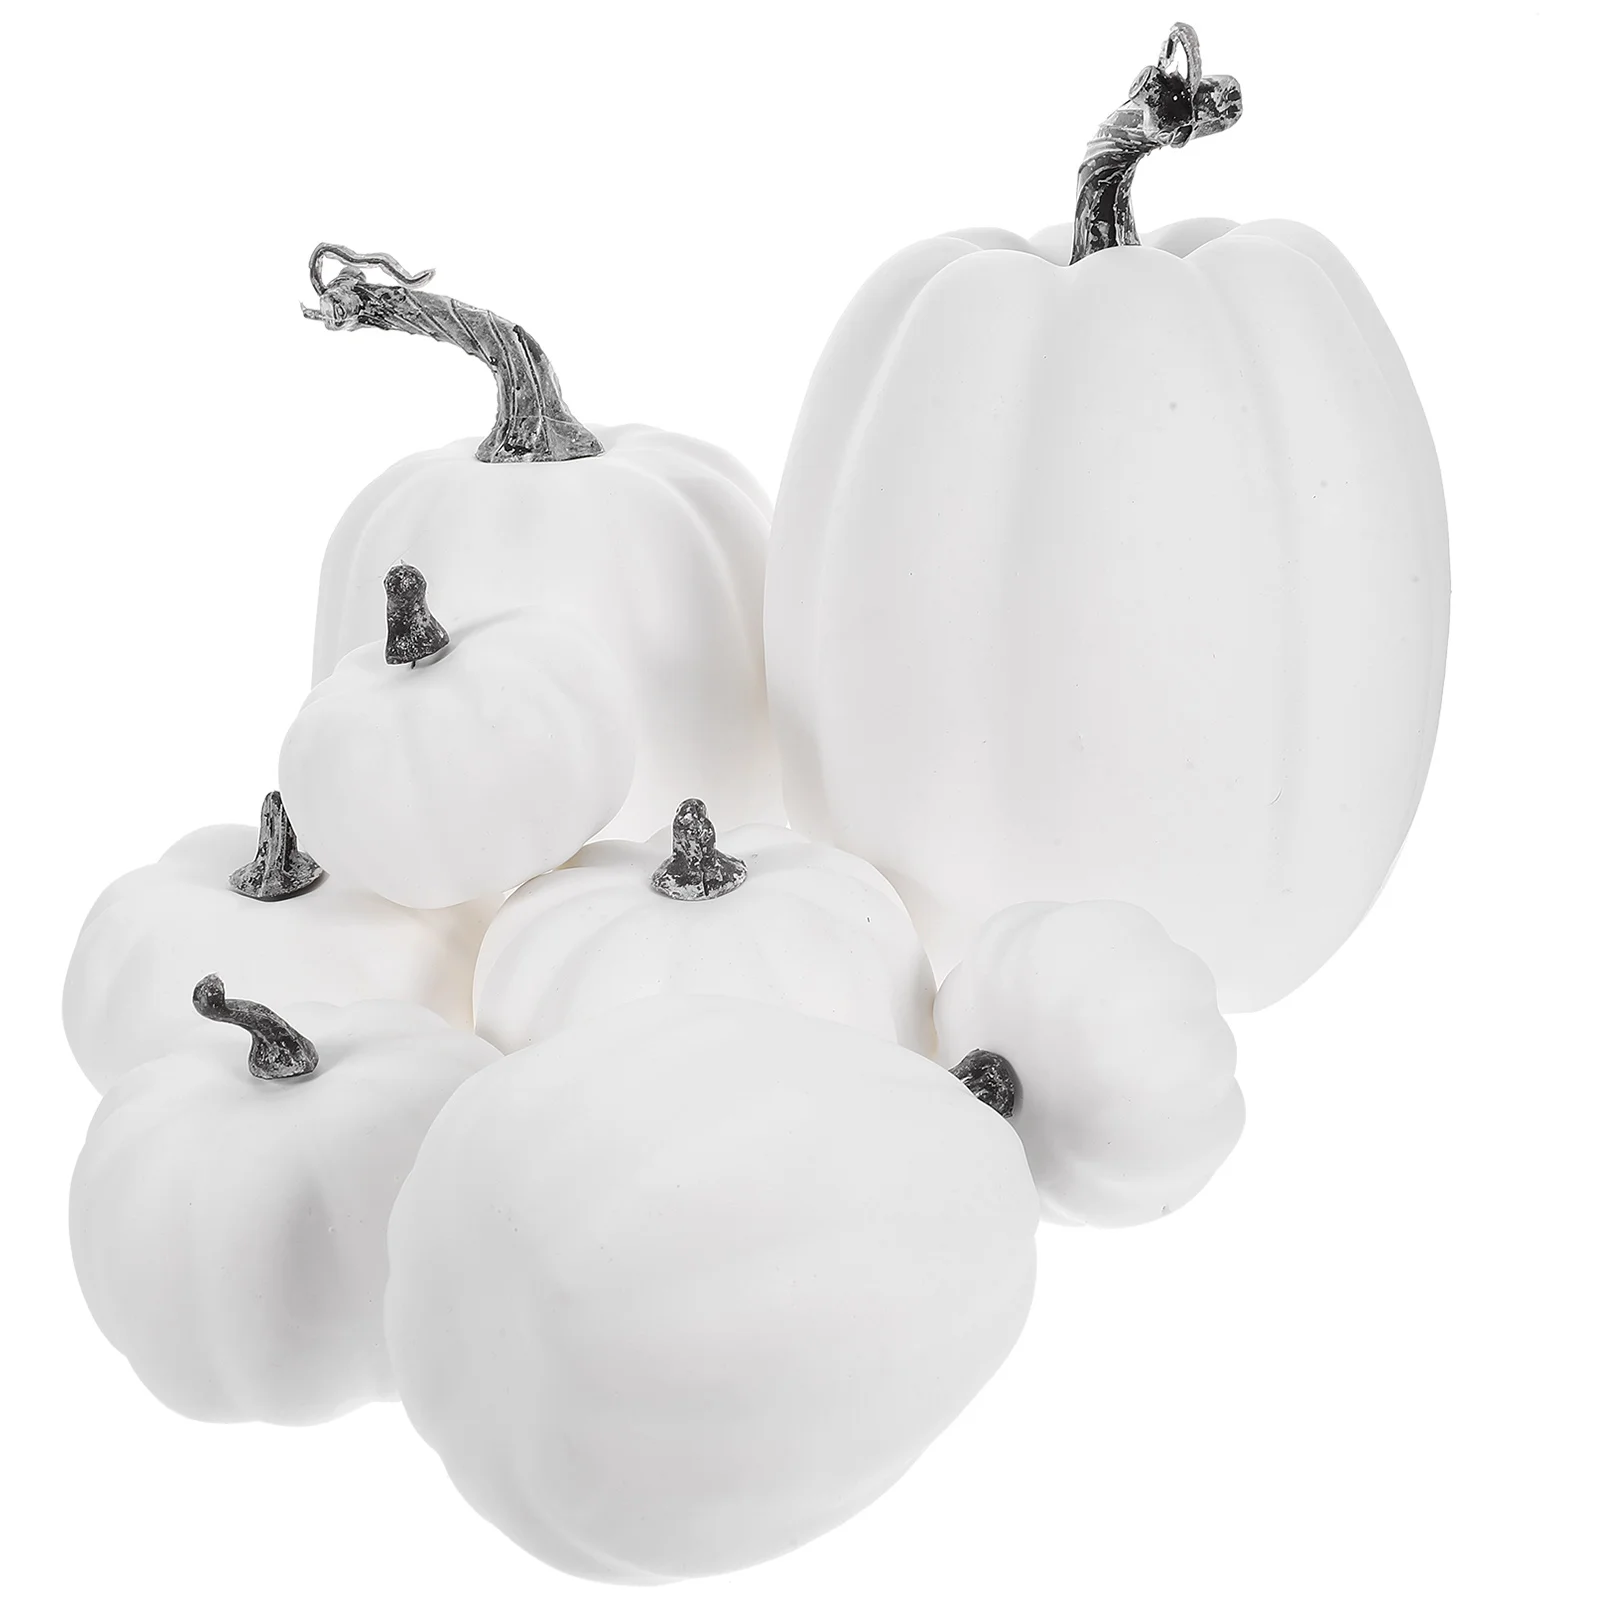 

White Foam Pumpkins Decorating Artificial Diy Crafts Halloween Thanksgiving Fall Harvest Party Decorations